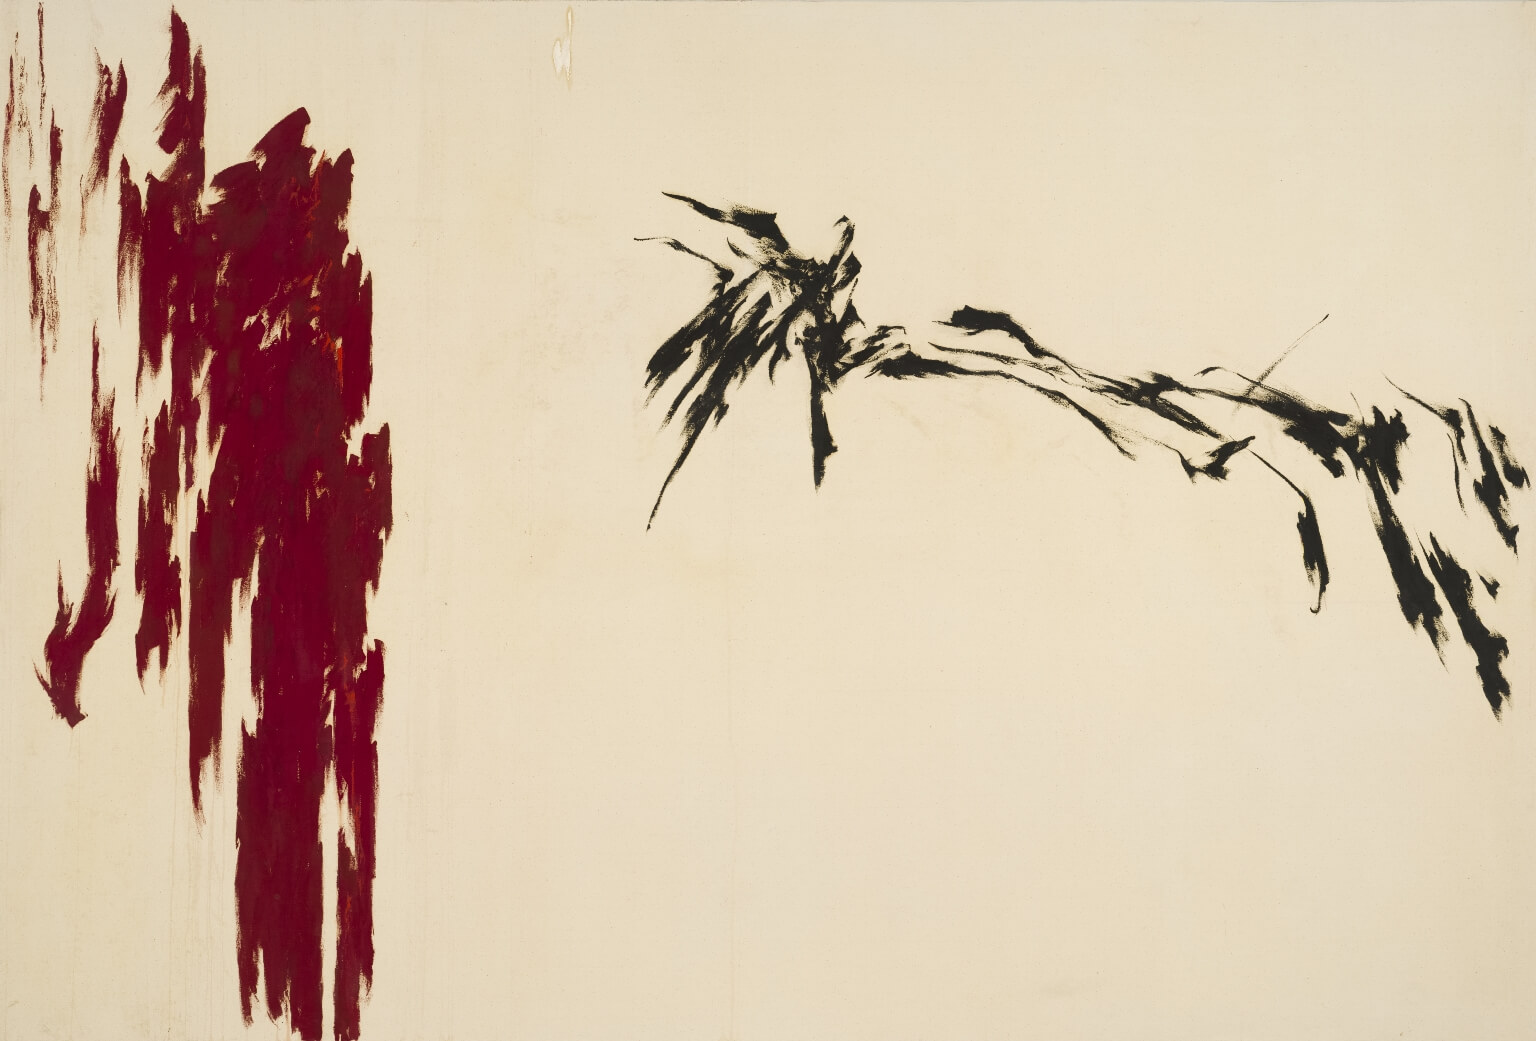 Abstract painting with mostly bare canvas, a large vertical jagged figure on the left in dark red and a more horizontal floating figure in black on the right side